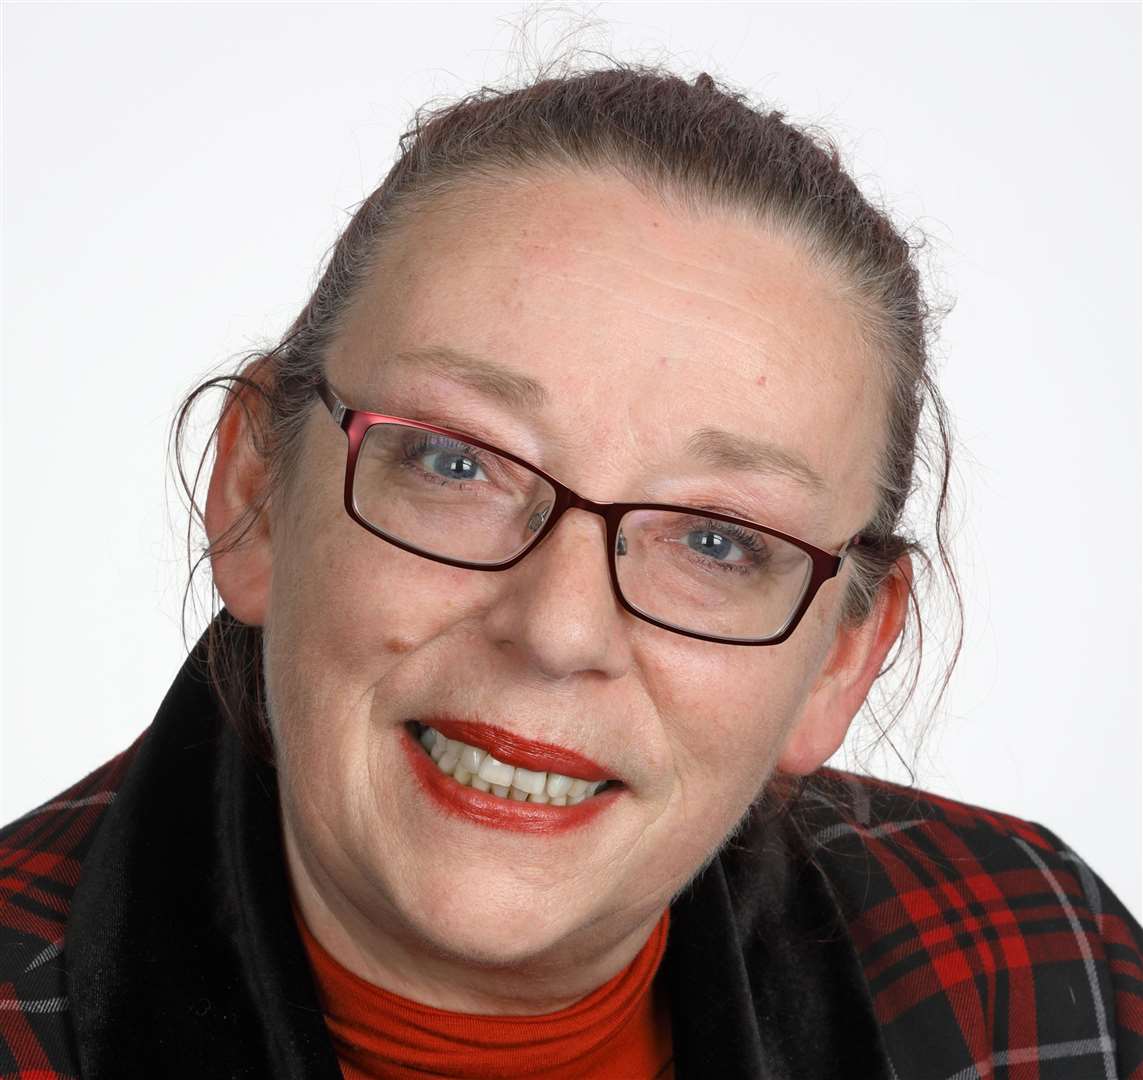 Councillor Jackie Meade, Labour, East Folkestone Ward, Folkestone and Hythe District Council